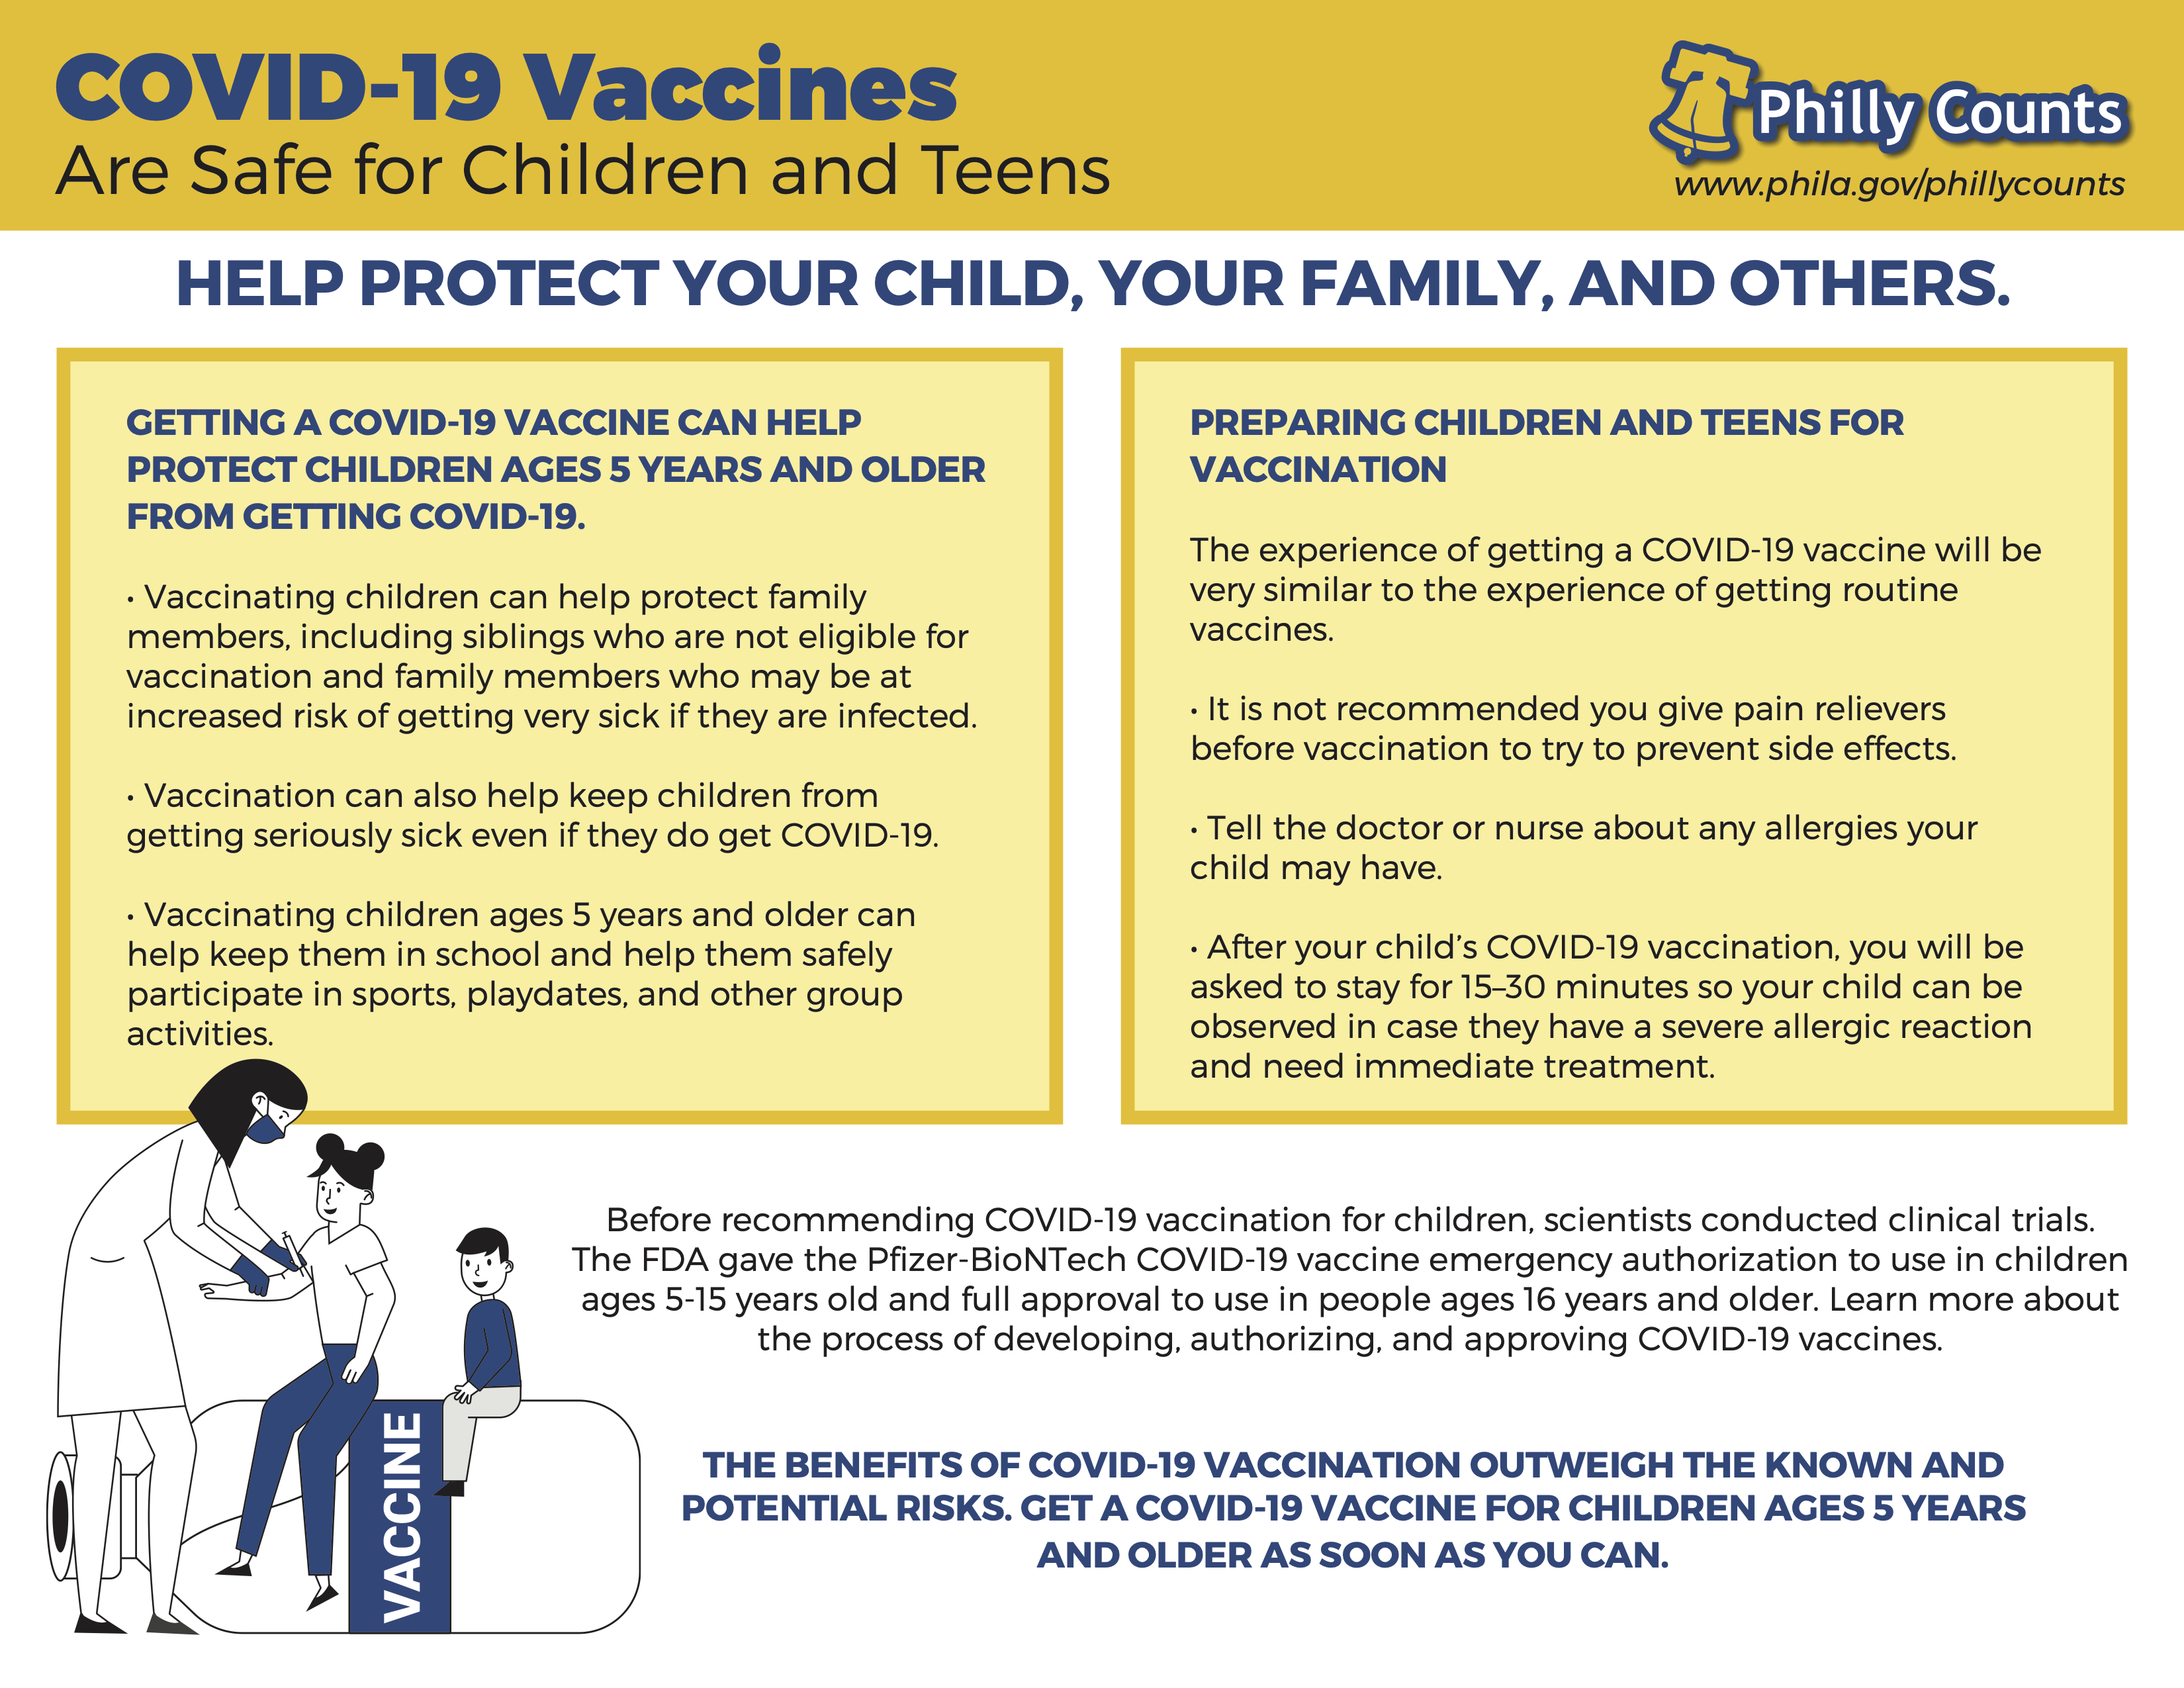 A flyer called &quotCOVID-19 Vaccines are Safe for Children and Teens.&quot It continues, &quotHelp protect your child, your family, and others,&quot followed by two long boxes of text. One states, &quotGetting a COVID-19 vaccine can help protect children ages 5 years and older from getting COVID-19.&quot The other states, &quotPreparing children and teens for vaccination.&quot They both go on to give bulleted lists of information. At the bottom is a statement about the scientific work conducted before vaccine approval.